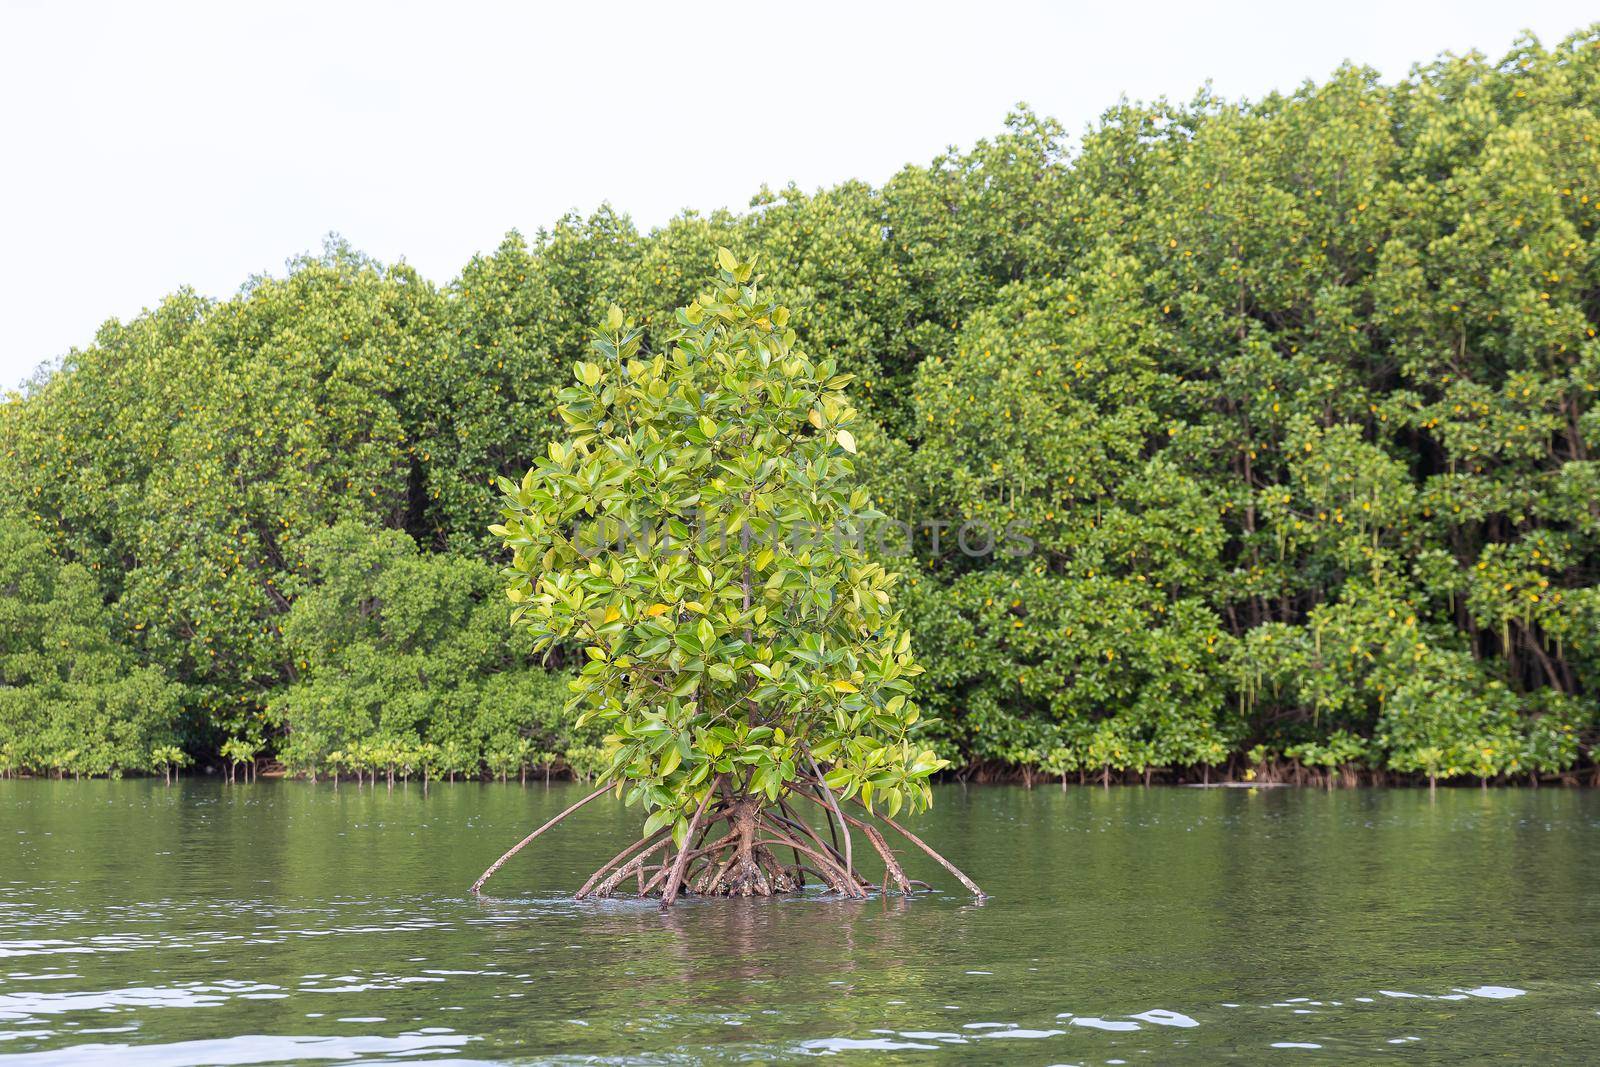 Rhizophora apiculata blume forest in mangrove area, special tree with prop or buttress root and also for aerating